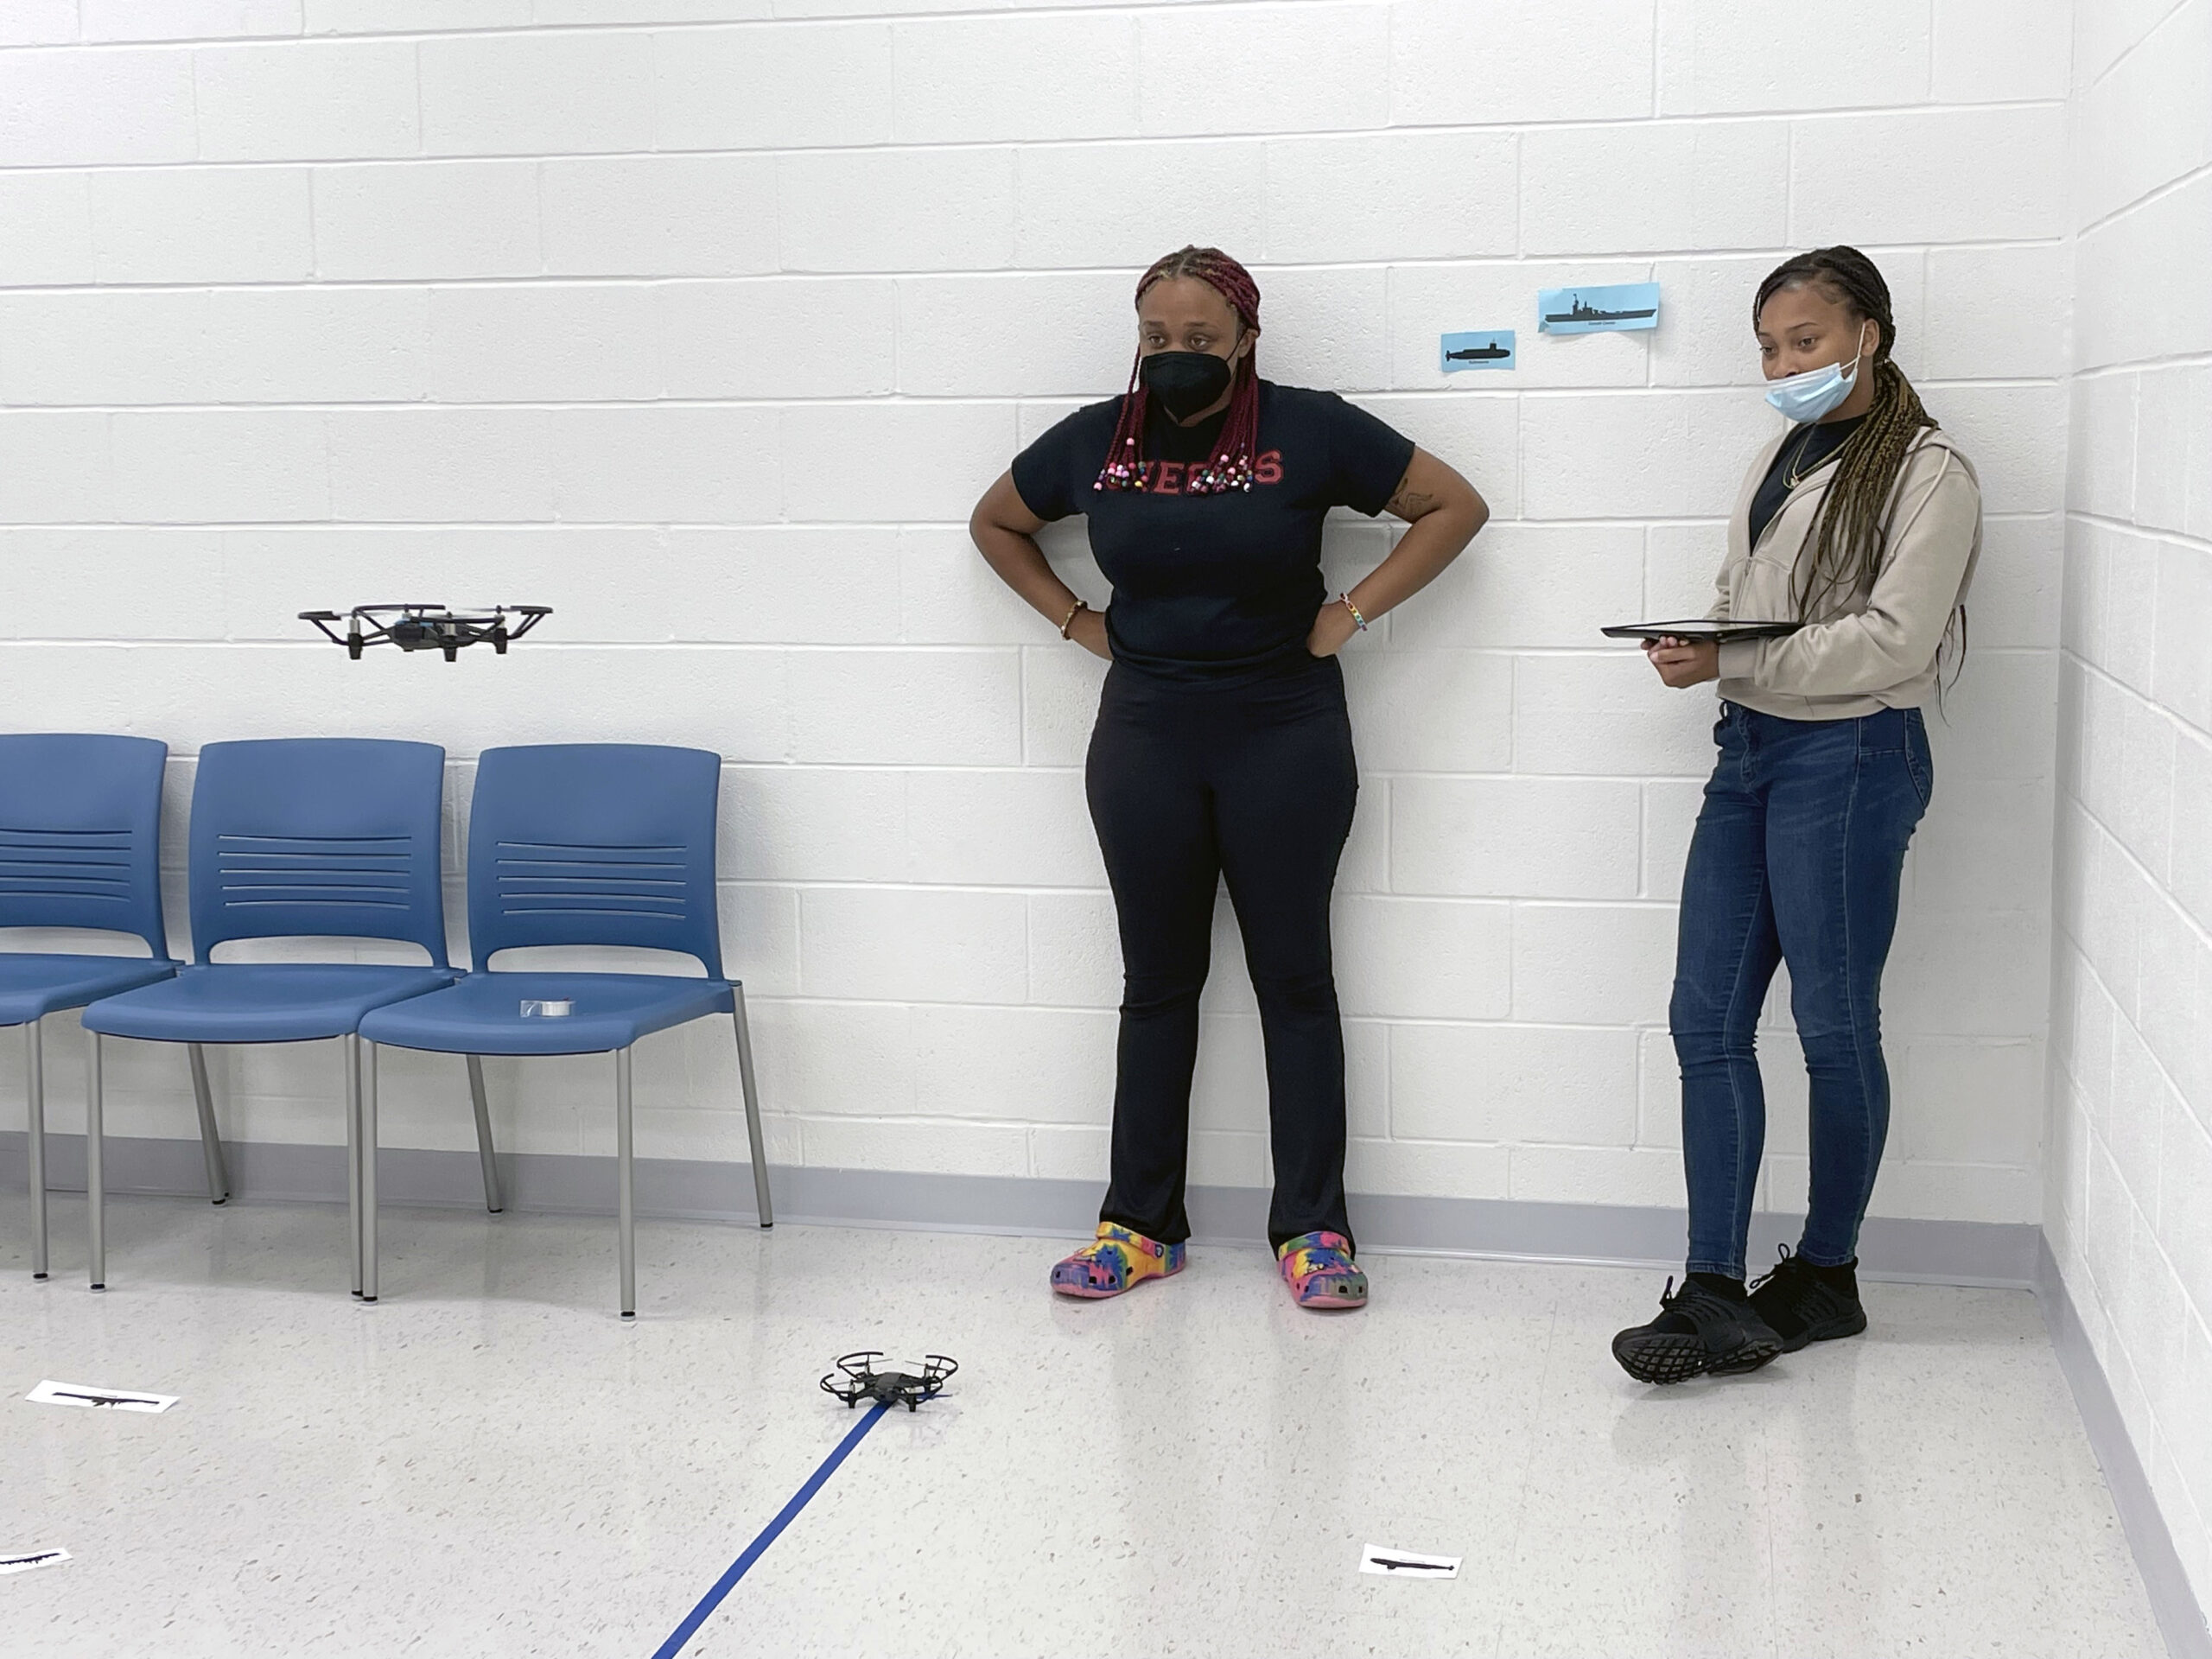 Two young women watching a small remote-controlled aircraft flying in a room. One woman is holding a tablet.